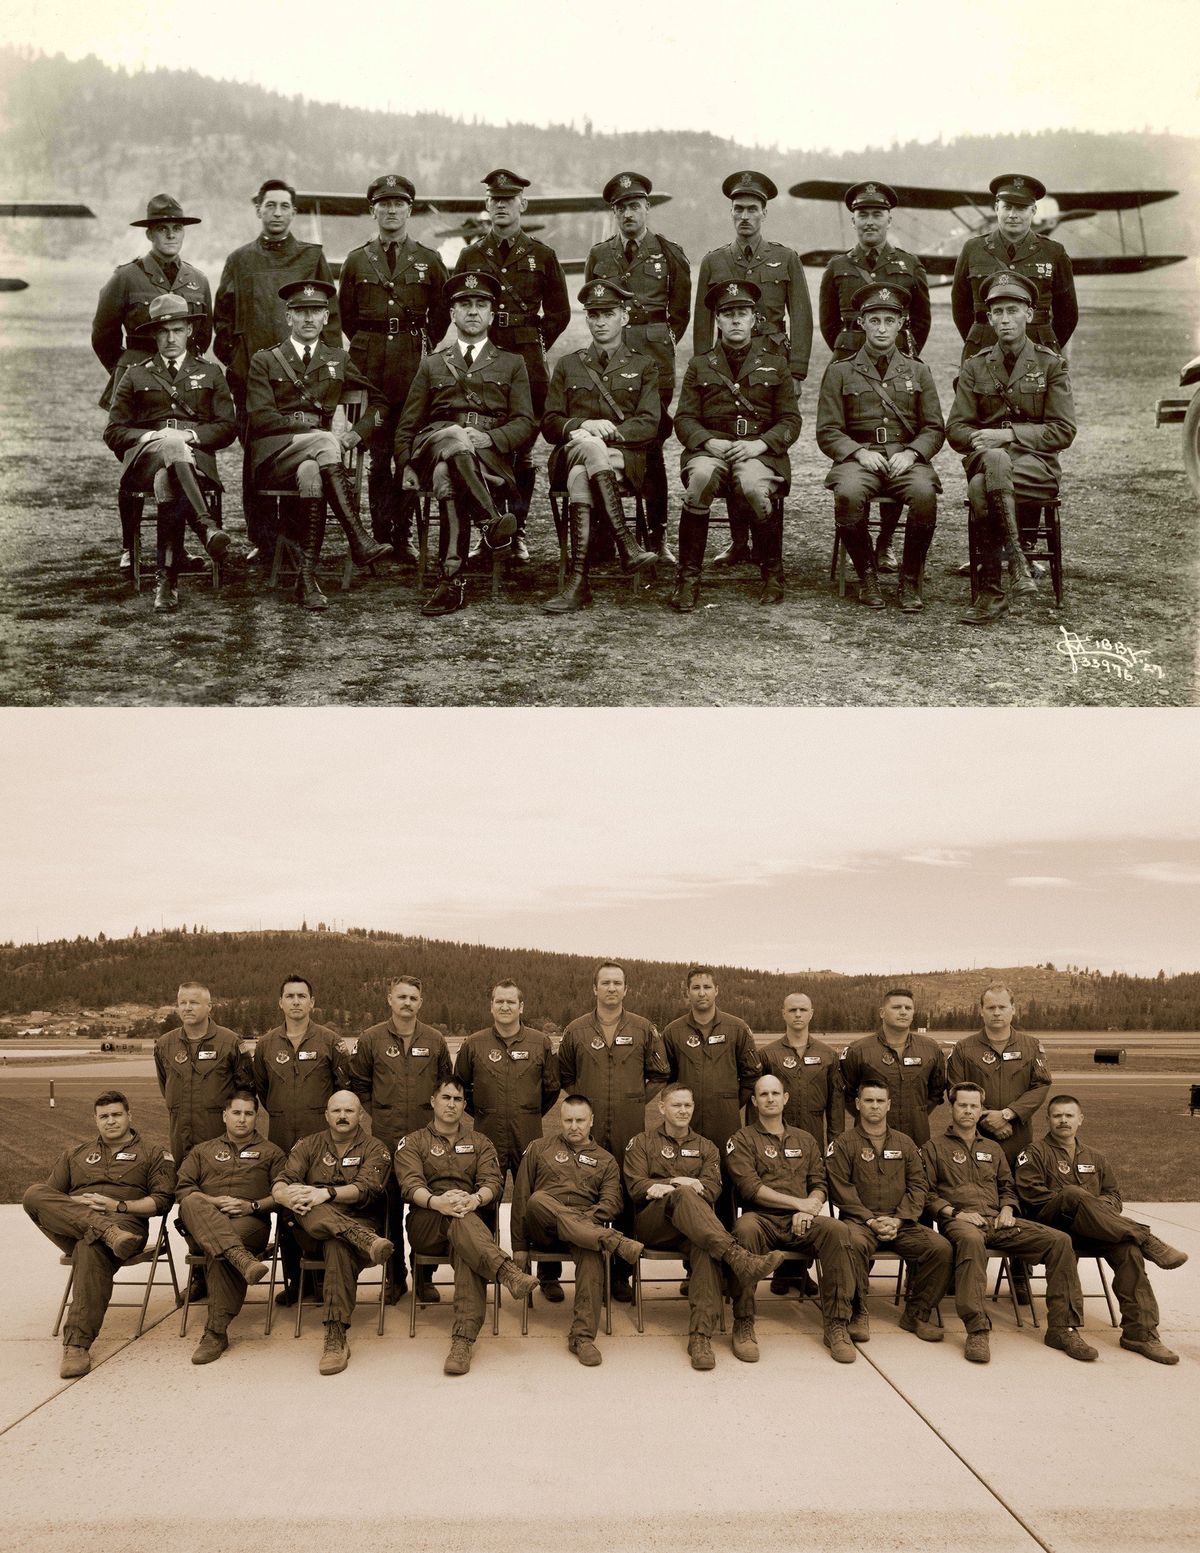 These photos were taken 100 years apart. The top photo shows the original 17 officers of the 116th Observation Squadron. All available officers of the 116th Air Refueling Squadron are shown in the bottom photo. Both photos were taken at Felts Field.  (Courtesy of the Washington Air National Guard )